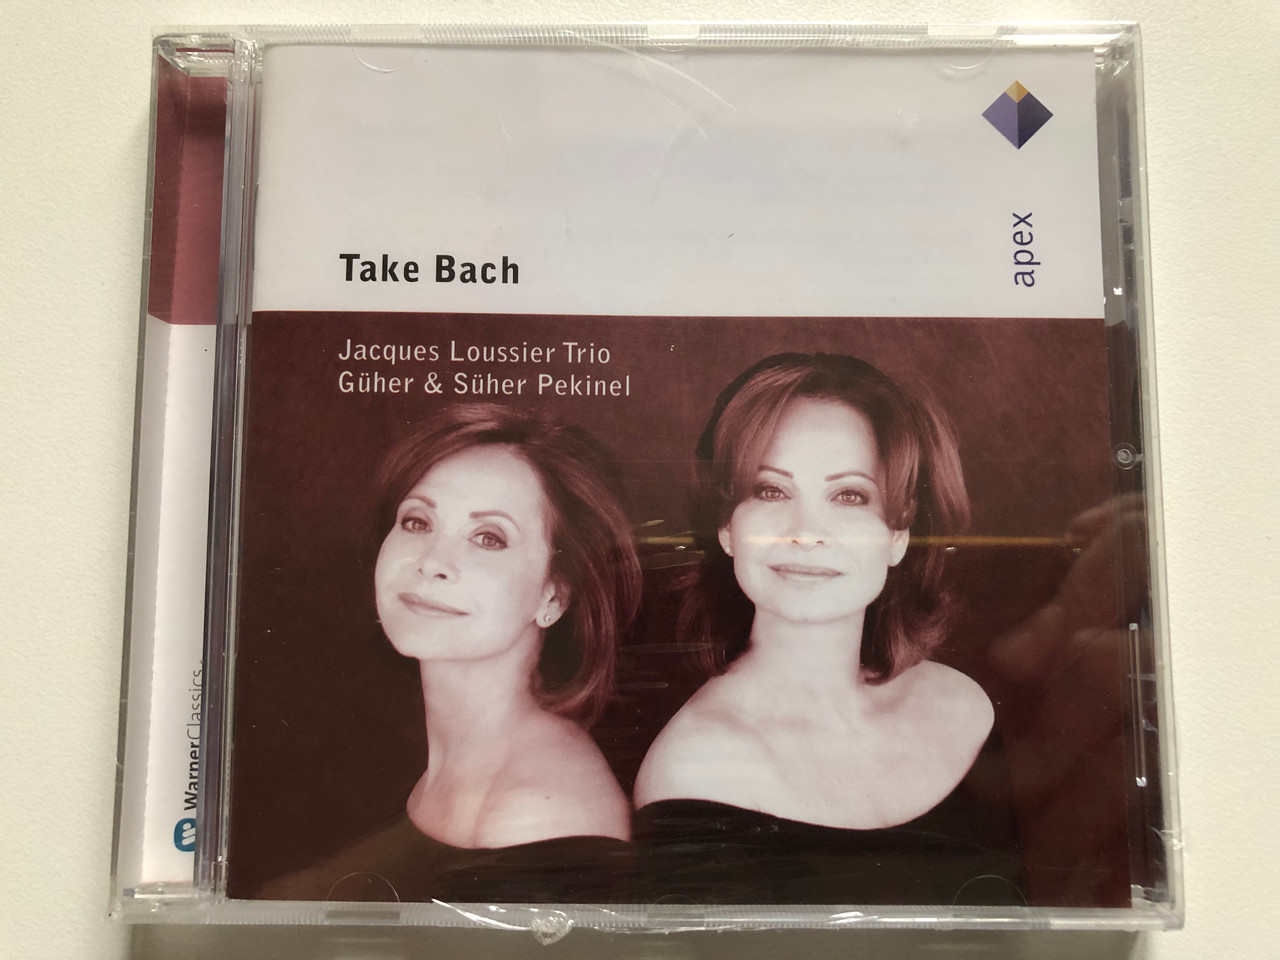 https://cdn11.bigcommerce.com/s-62bdpkt7pb/products/0/images/316644/Take_Bach_-_Jacques_Loussier_Trio_Gher_Sher_Pekinel_Apex_Audio_CD_2005_2564_62116-2_1__02196.1702895167.1280.1280.JPG?c=2